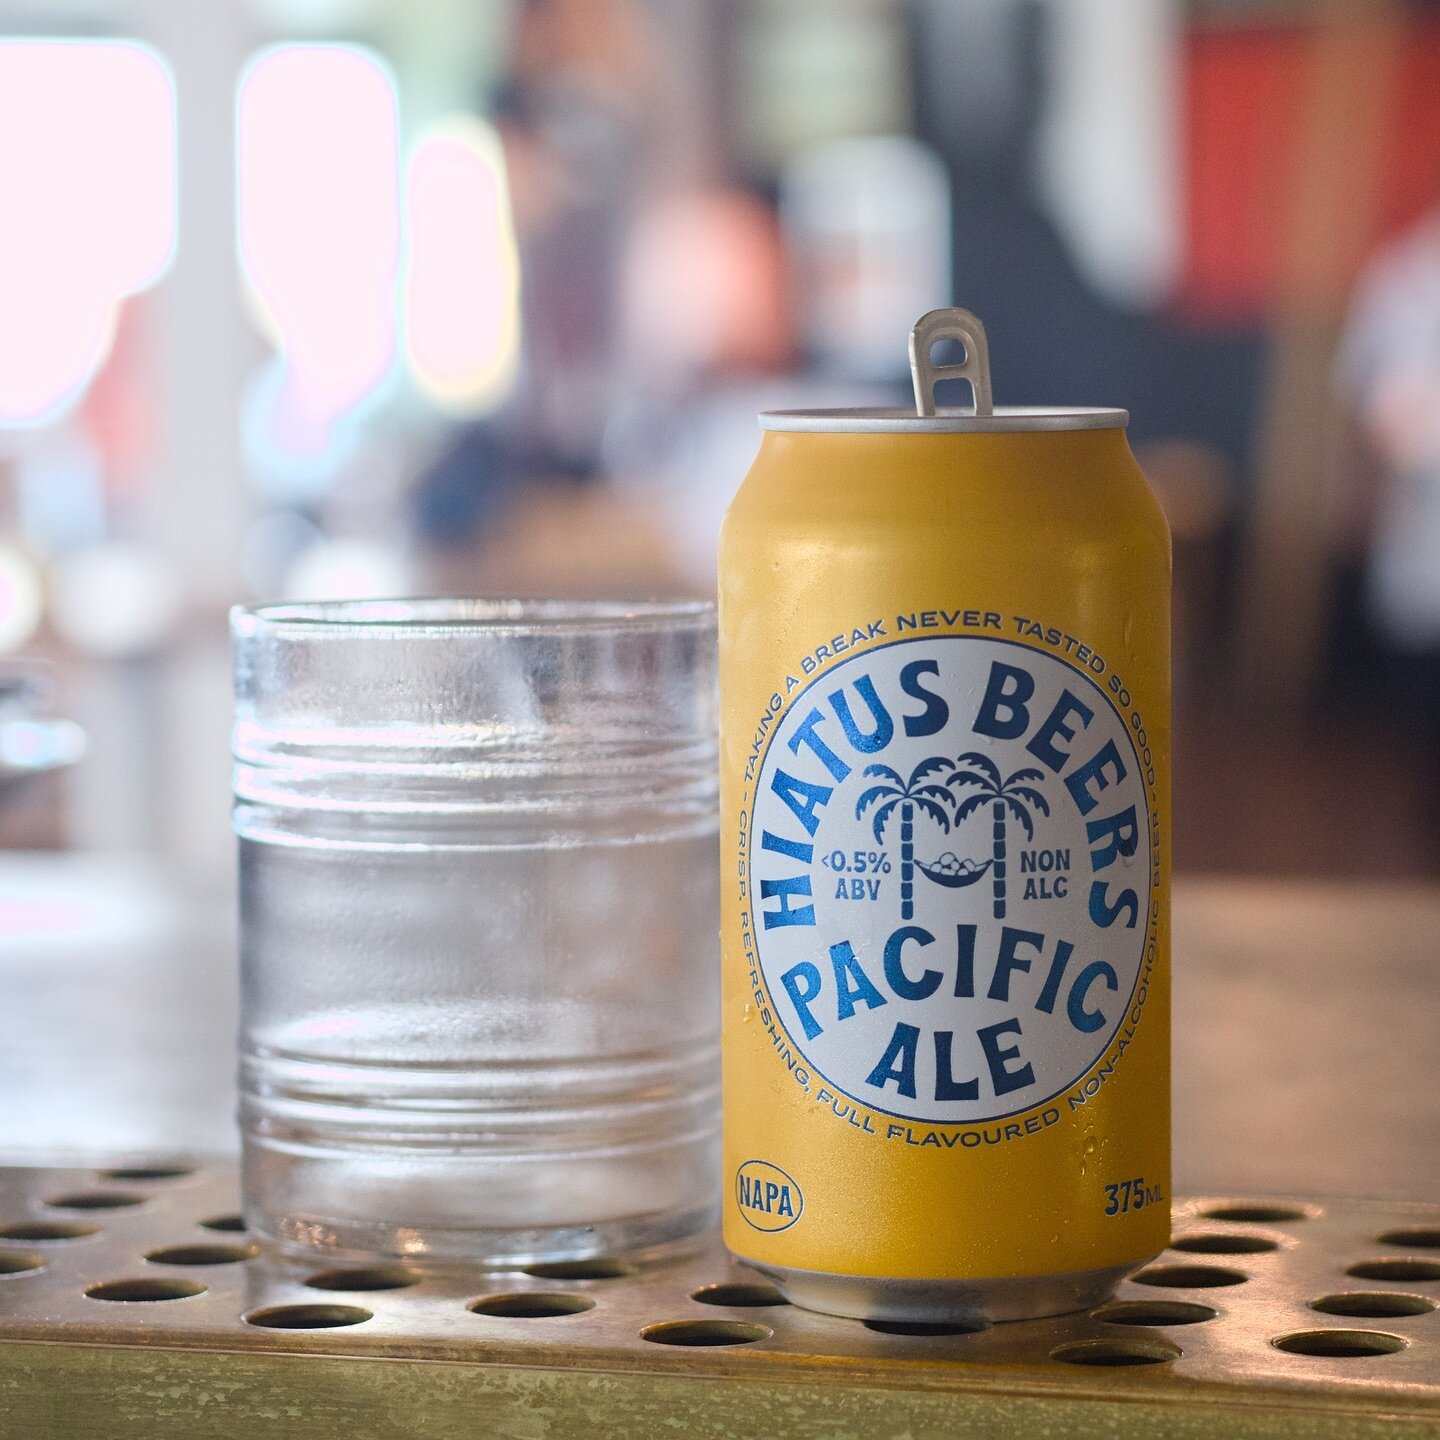 🍺 Hiatus Pacific Ale 🍺 

The best non-alc beer we&rsquo;ve found! Full flavoured &amp; crisp without that sweetness you can get with some zero beers.

A local Qld gem from the Gold Coast
-
-
-
-
@drinkhiatusbeers #dryjanuary #nonalcbeer #nonalcohol